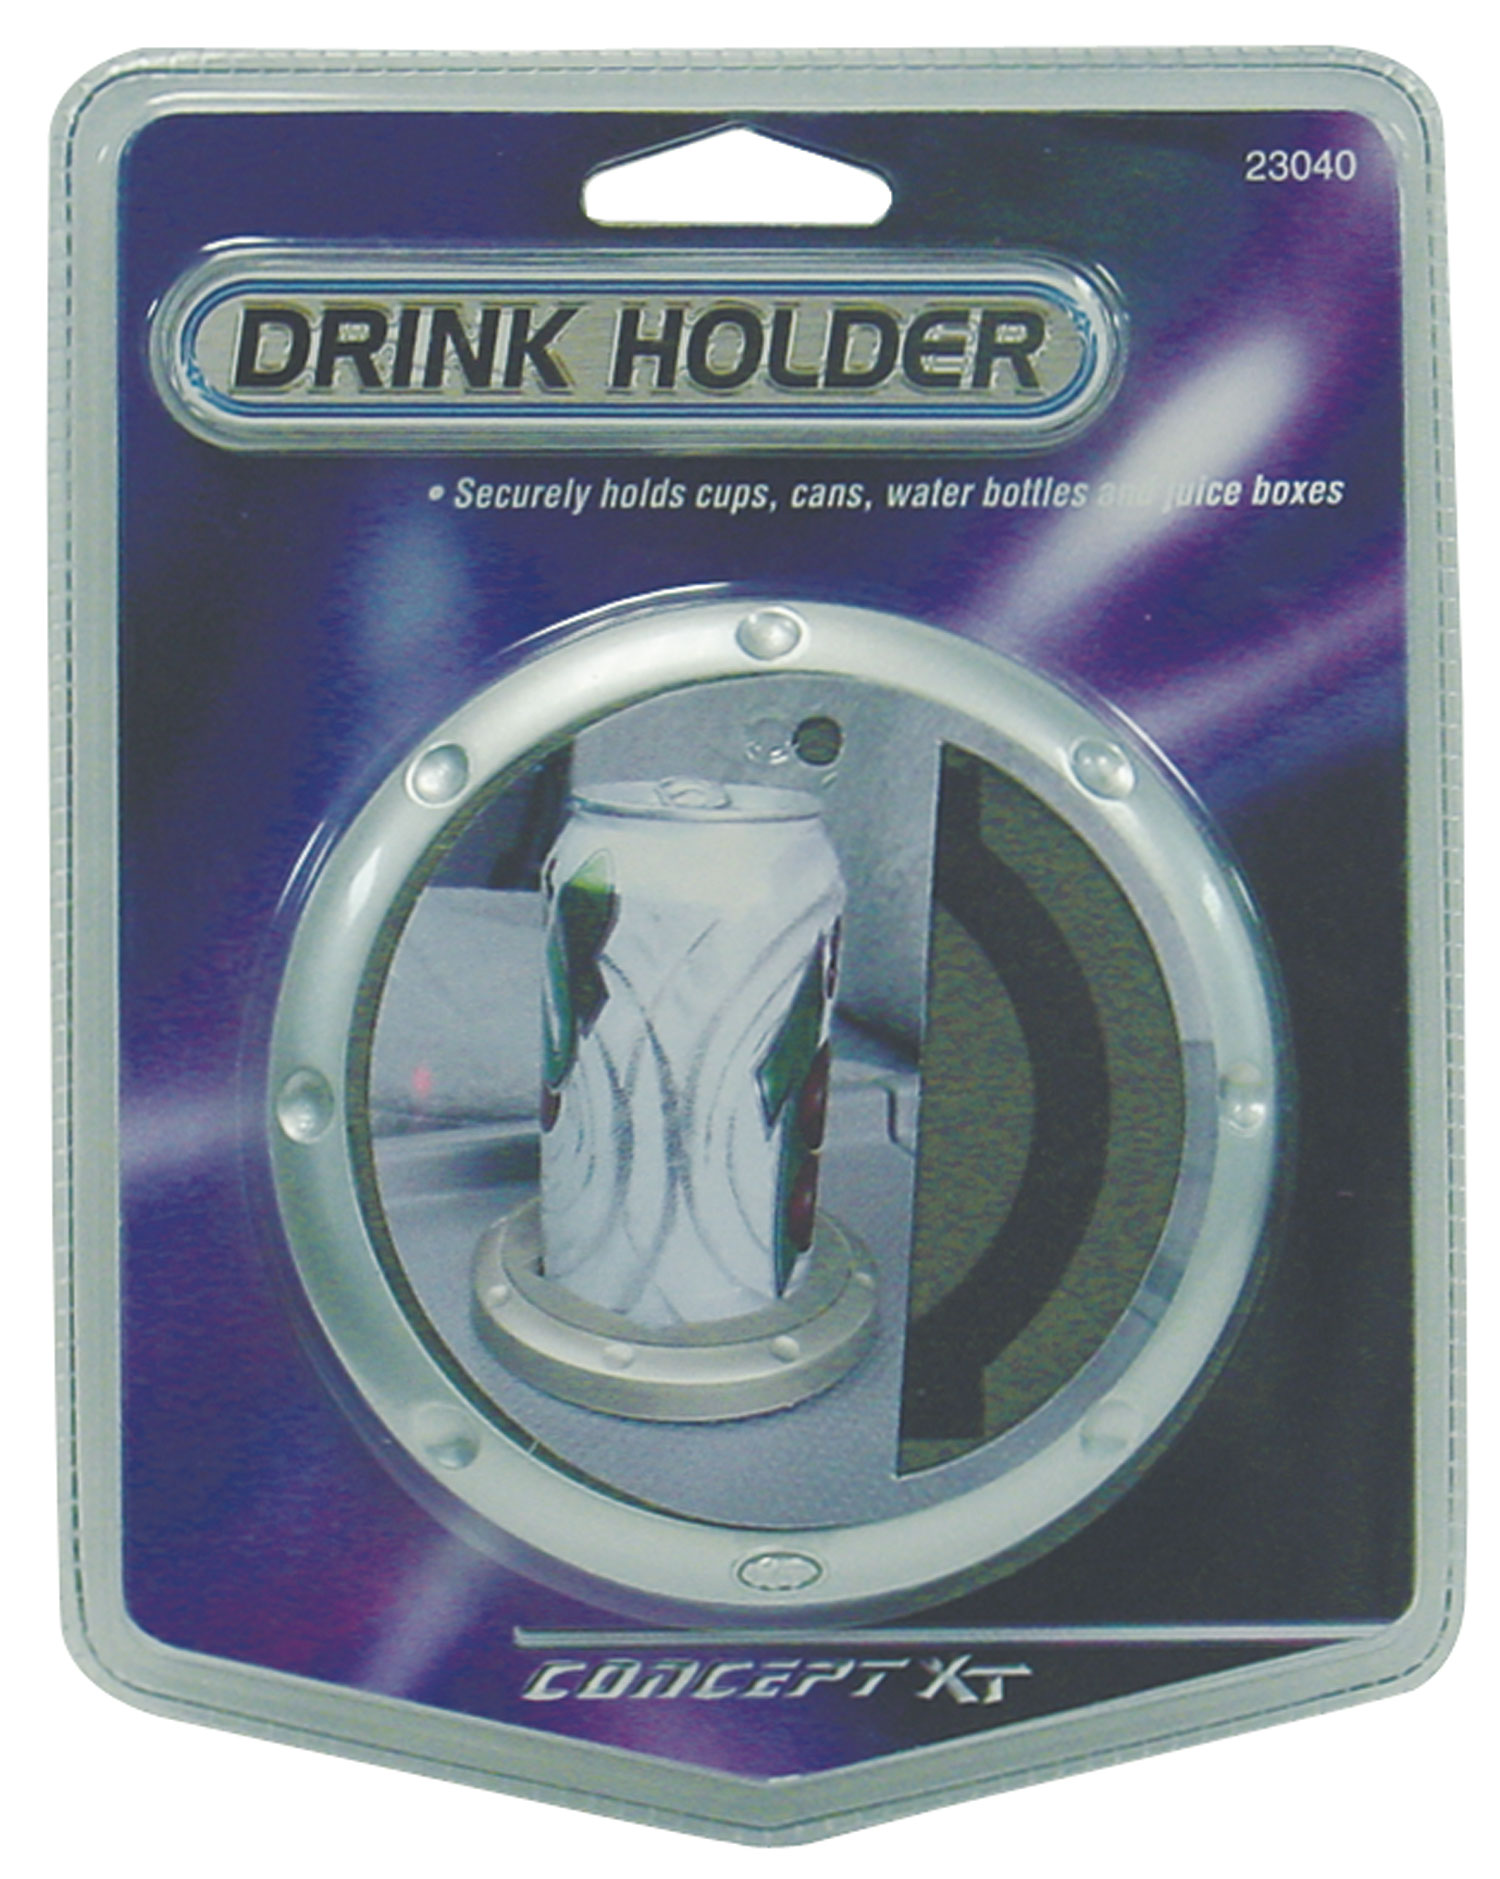 CONCEPT XT - STICK ON DRINK HOLDER SECURELY HOLDS CUPS, CANS, BOTTLES & JUICE BOXES, ATTACHES TO ANY FLAT SURFACE